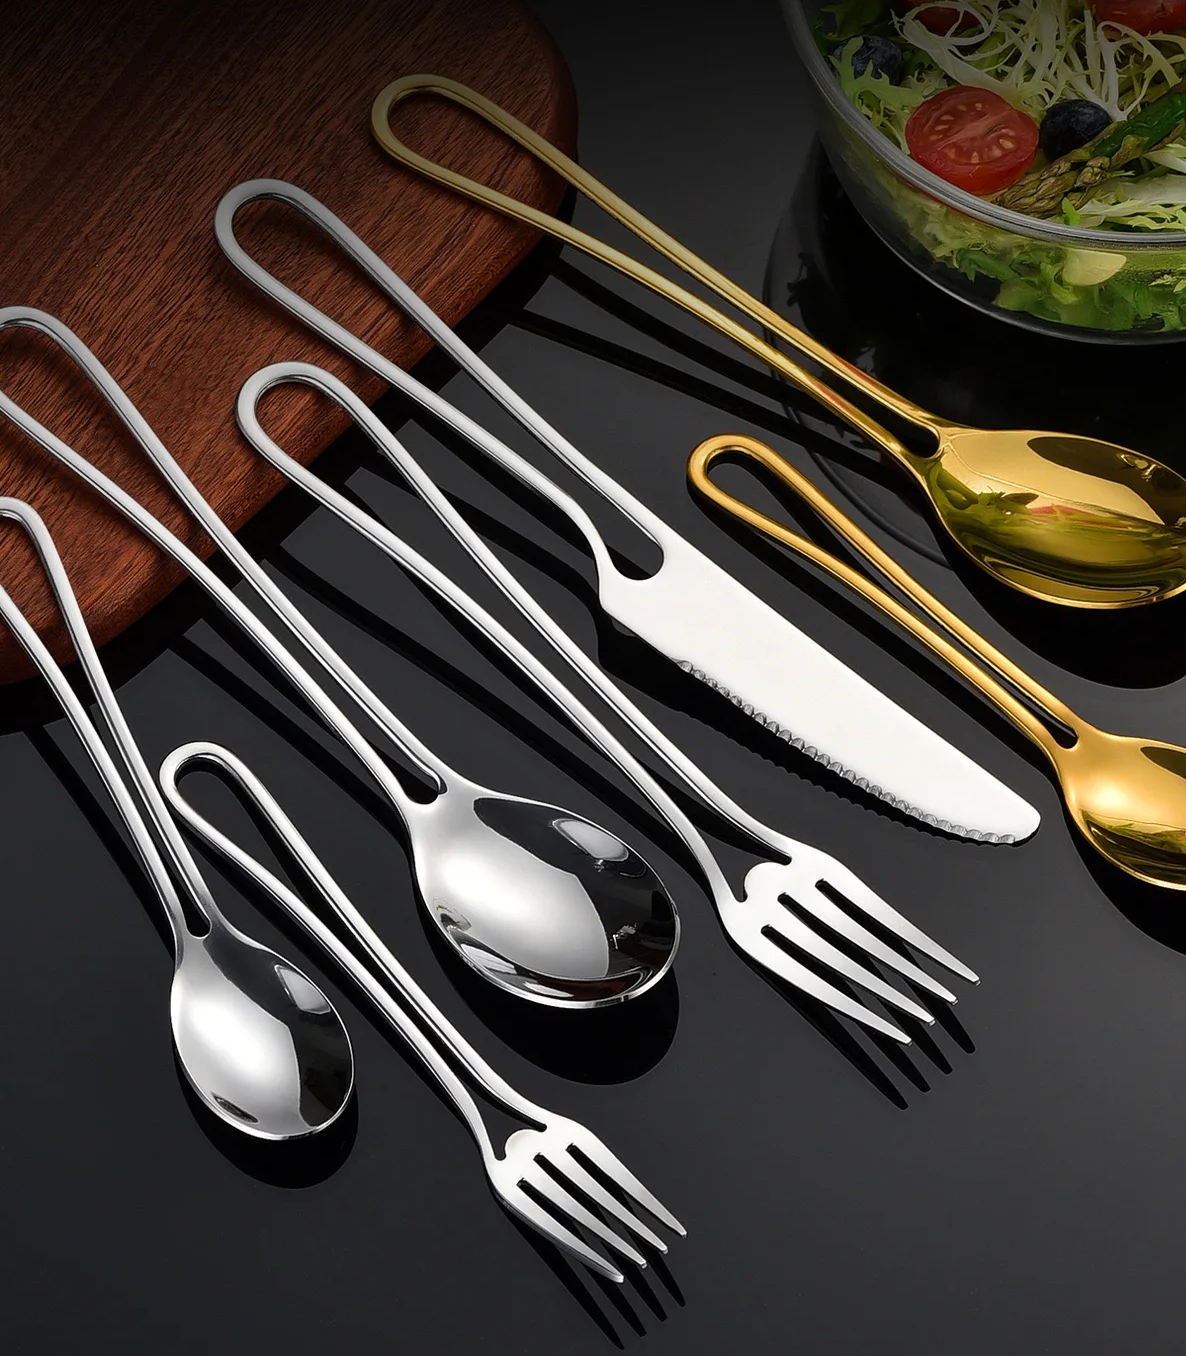 Modern Flatware In Minimalist Decor Style Spoons Forks And Knives In Shiny Smooth Stainless Steel Silver And Gold Silverware Sets